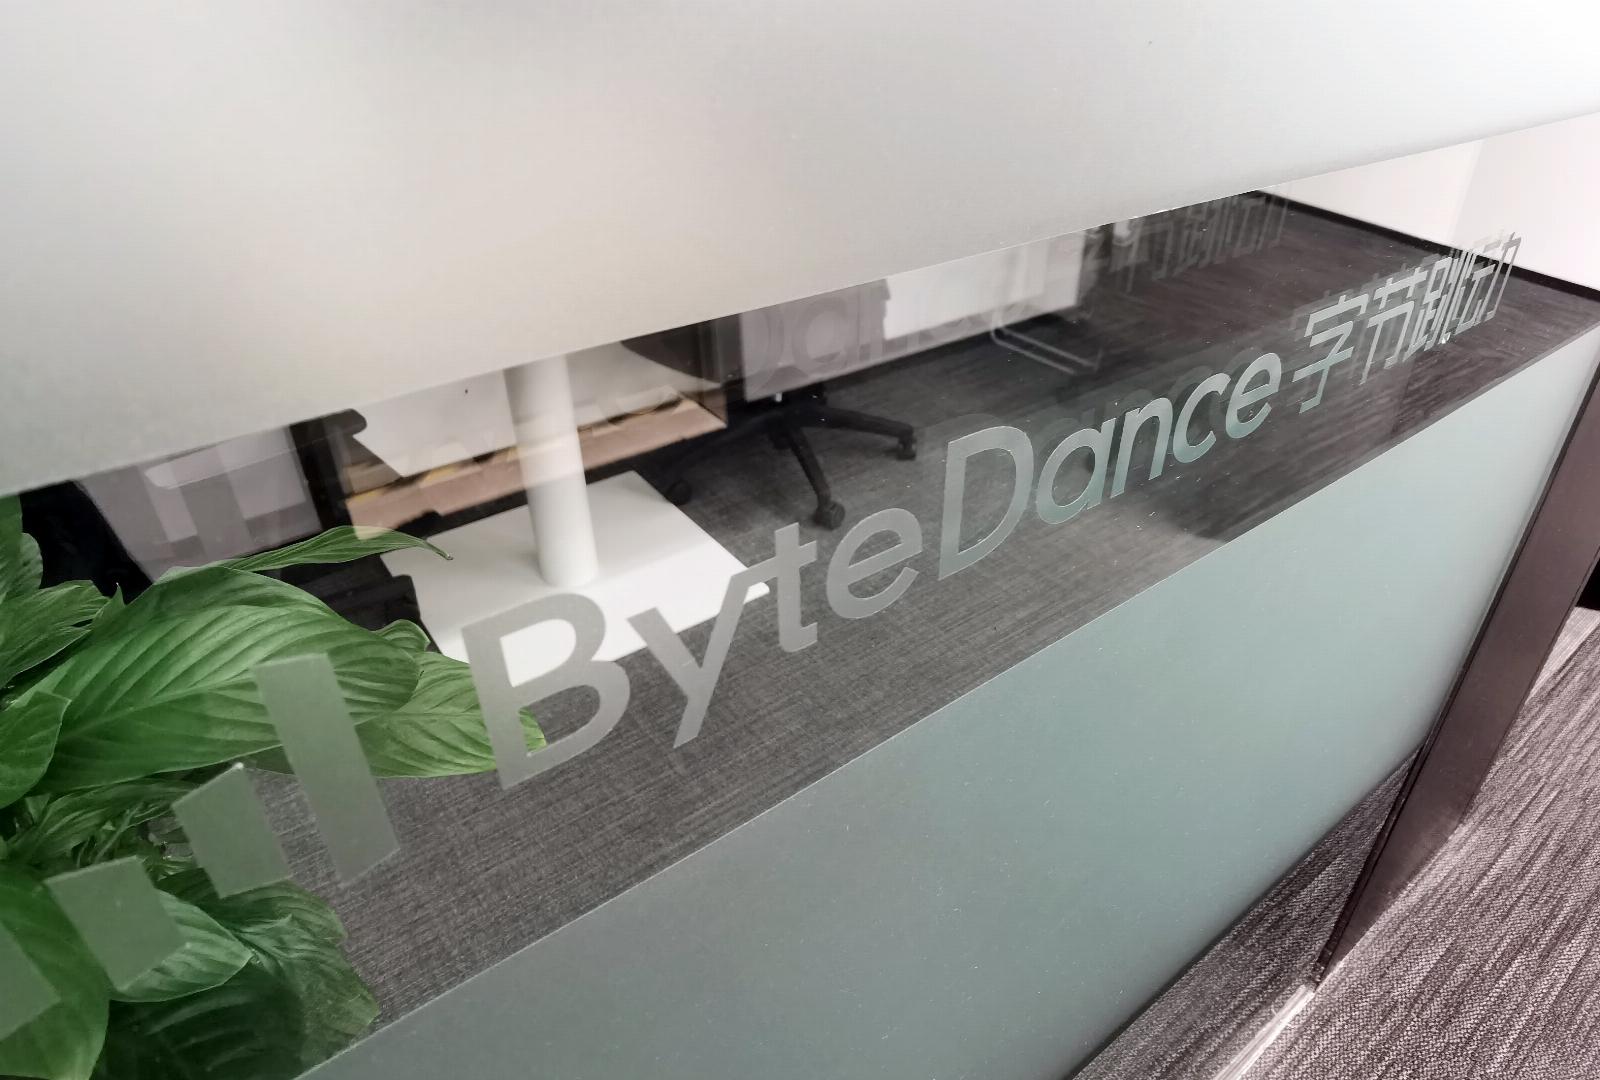 After two ambitious years, TikTok parent ByteDance starts mass layoffs in gaming